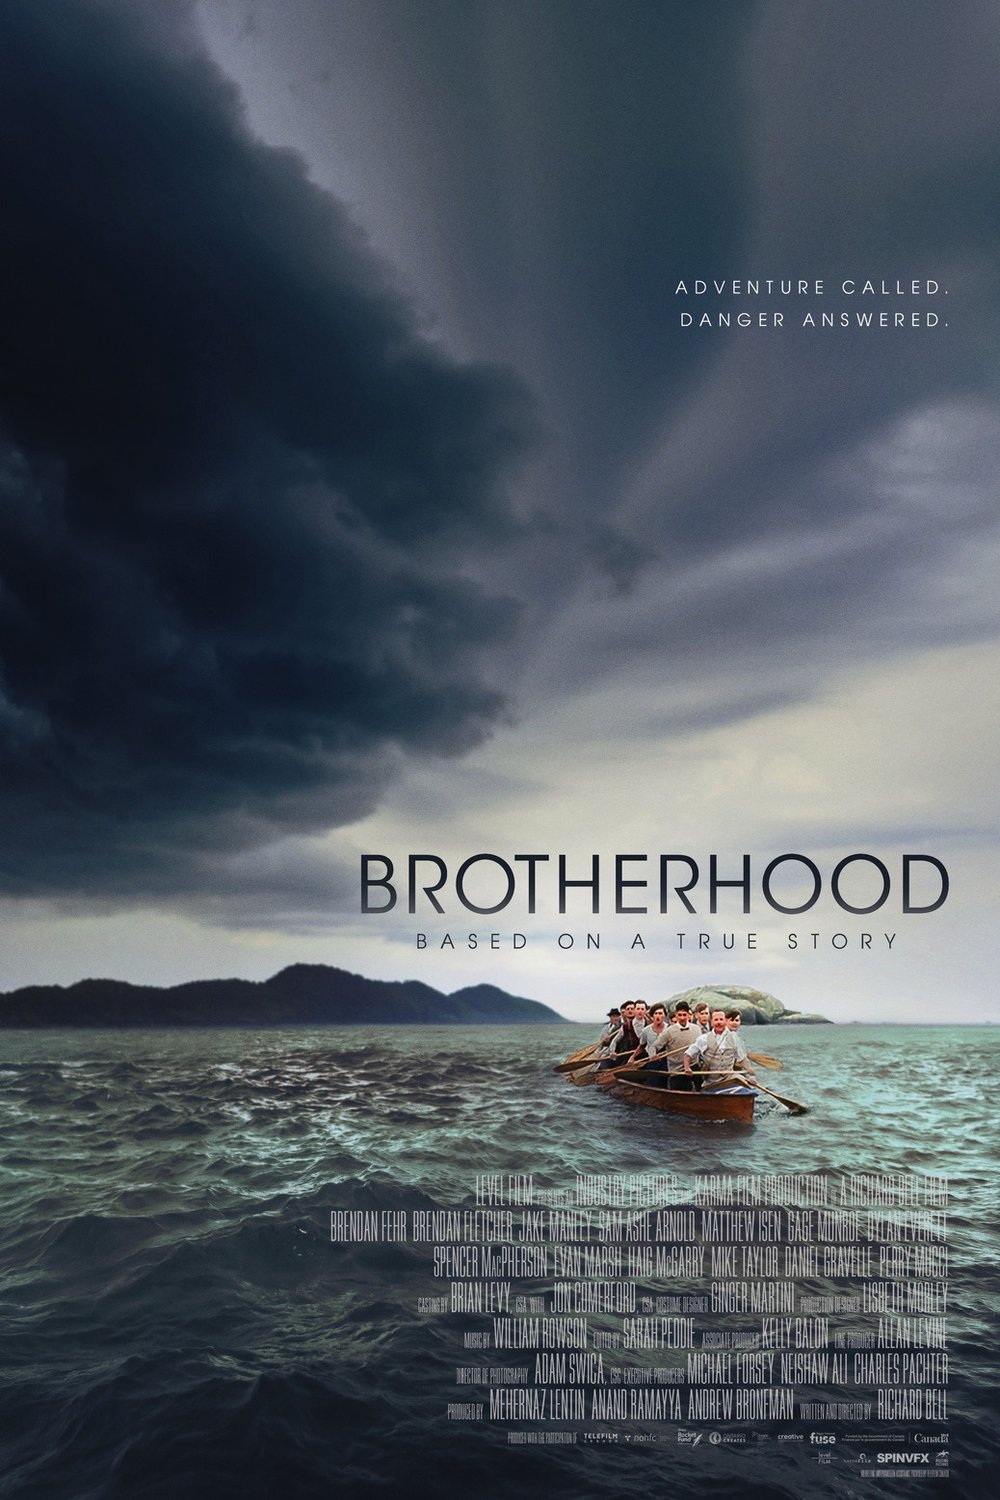 Poster of the movie Brotherhood